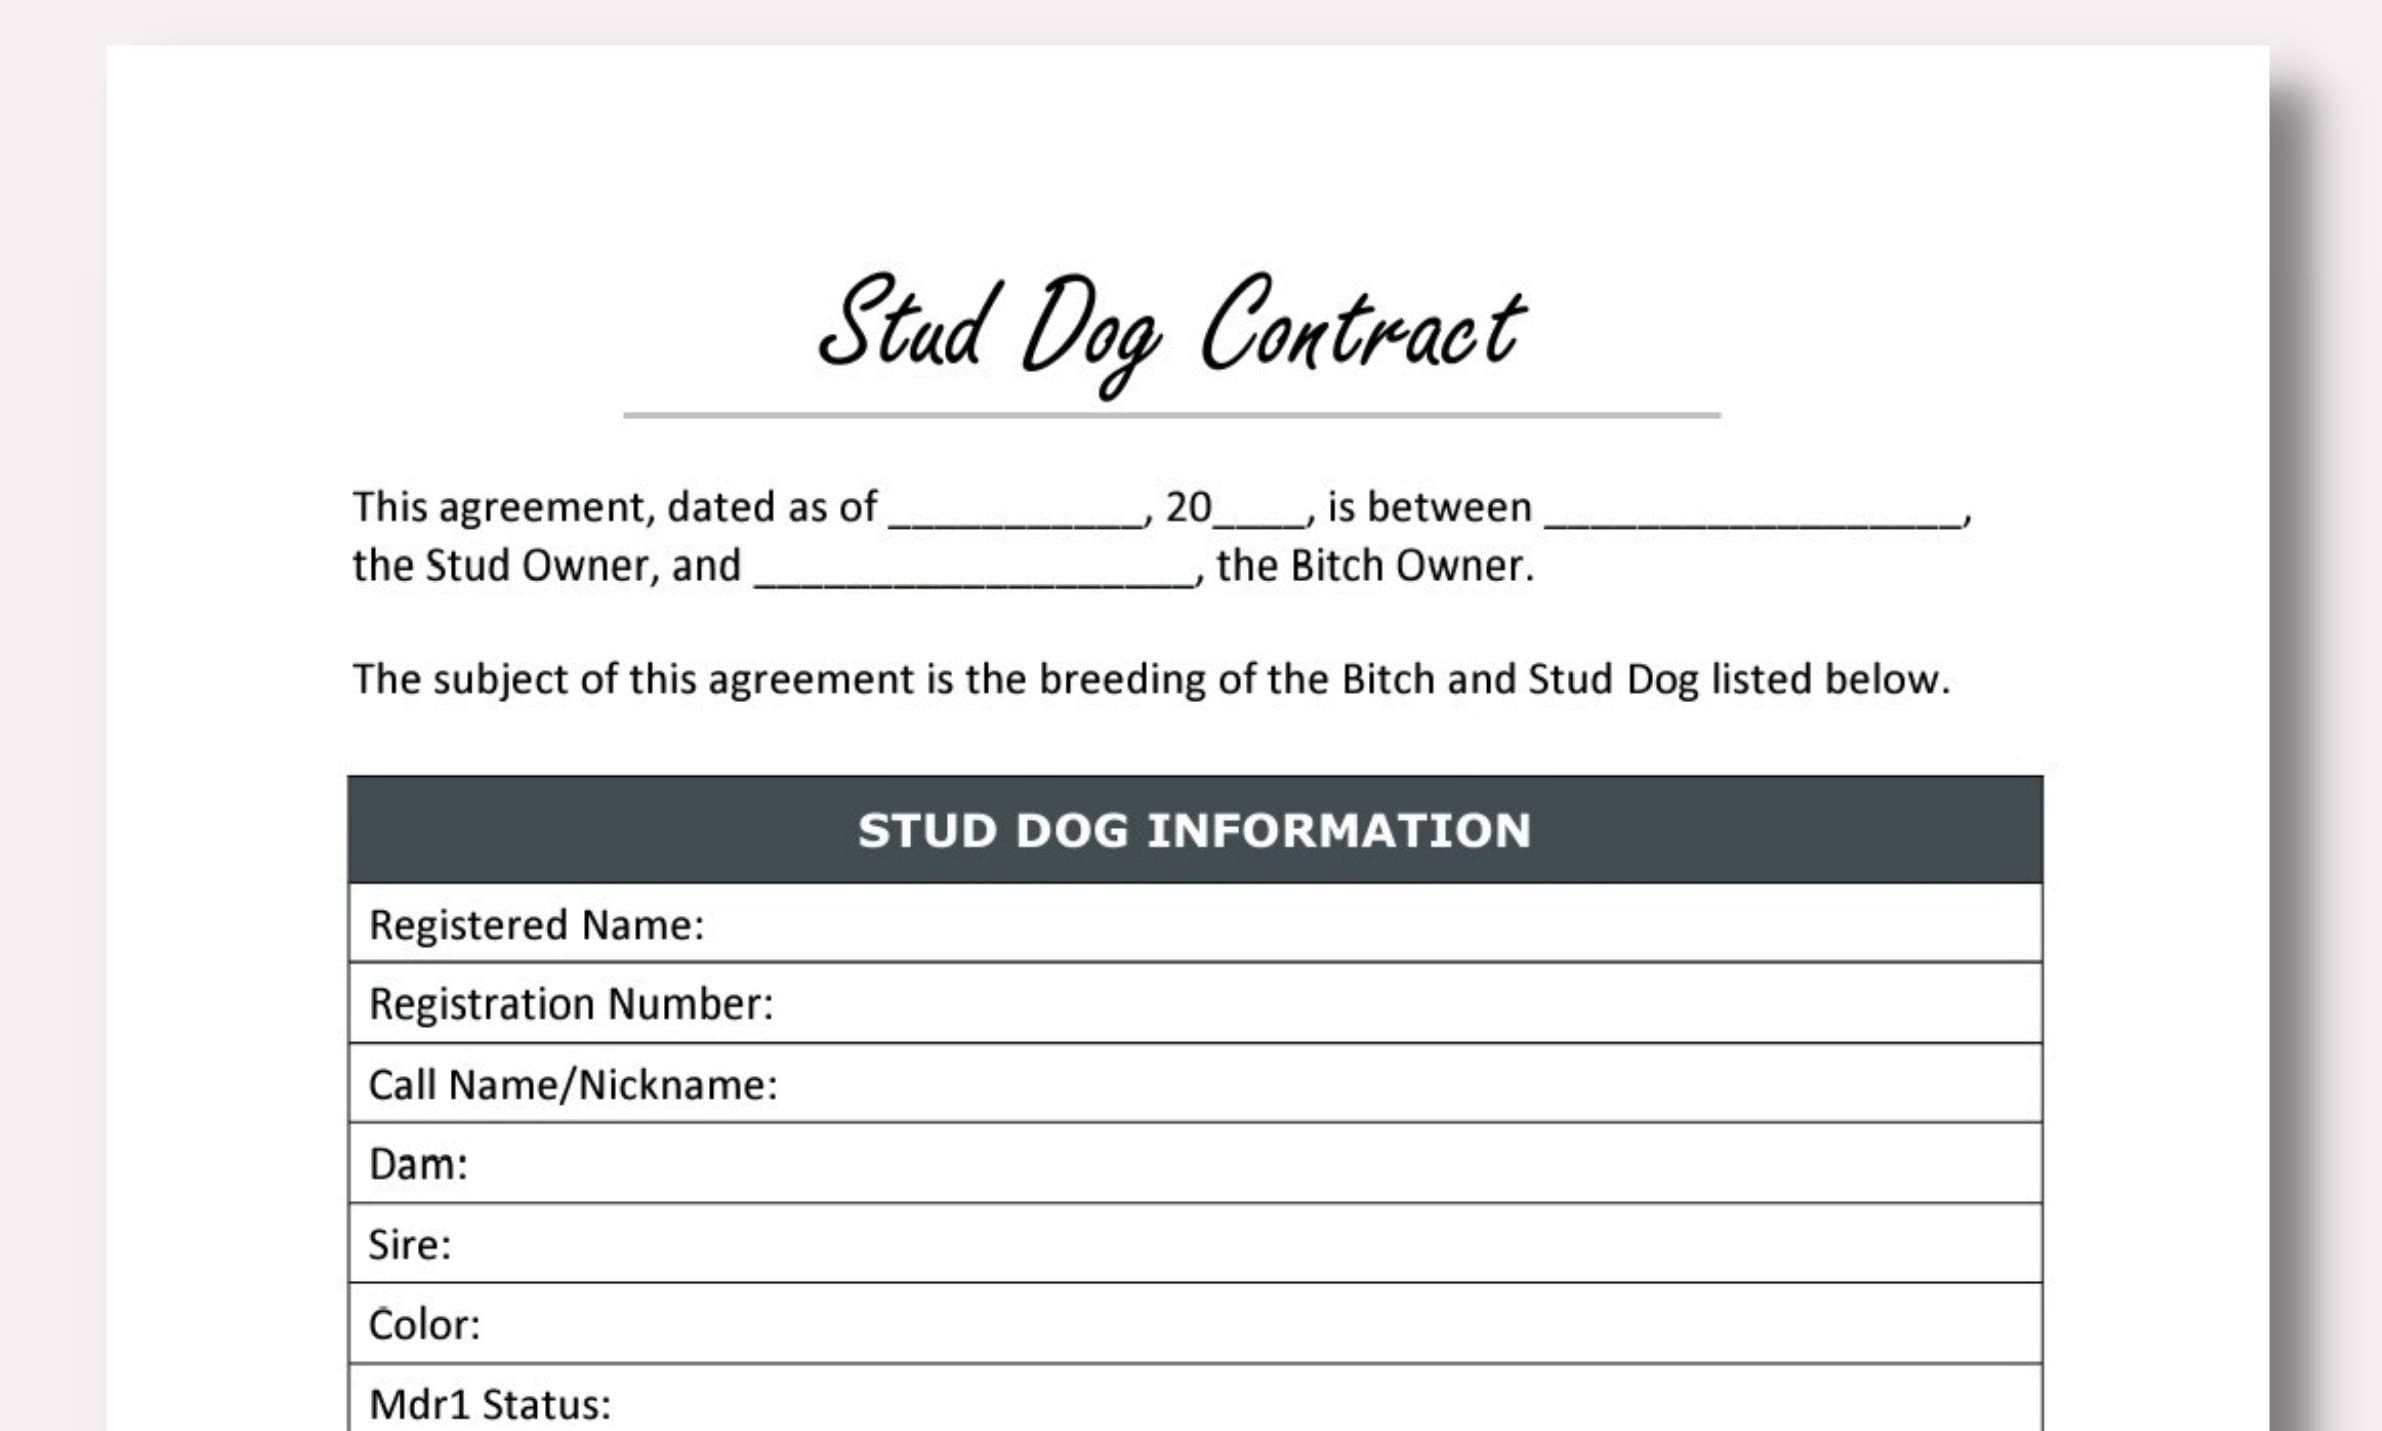 stud-dog-contract-template-etsy